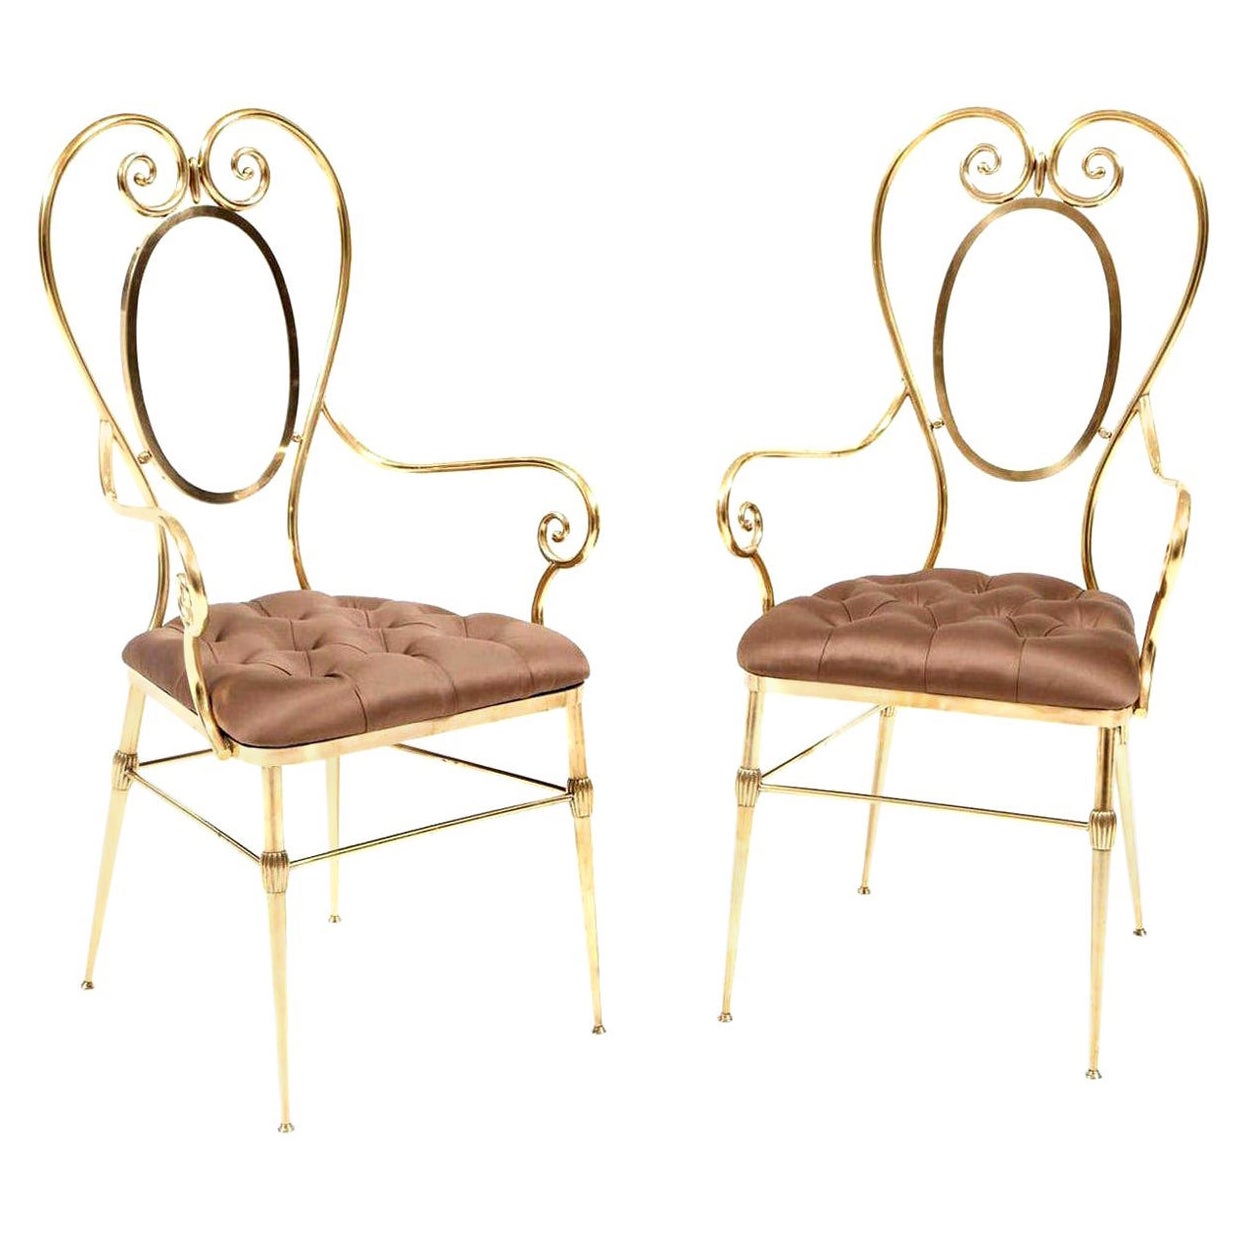 Chairs, Pair of Brass Chairs with Silk Upholstery, 1950's, Midcentury Design For Sale